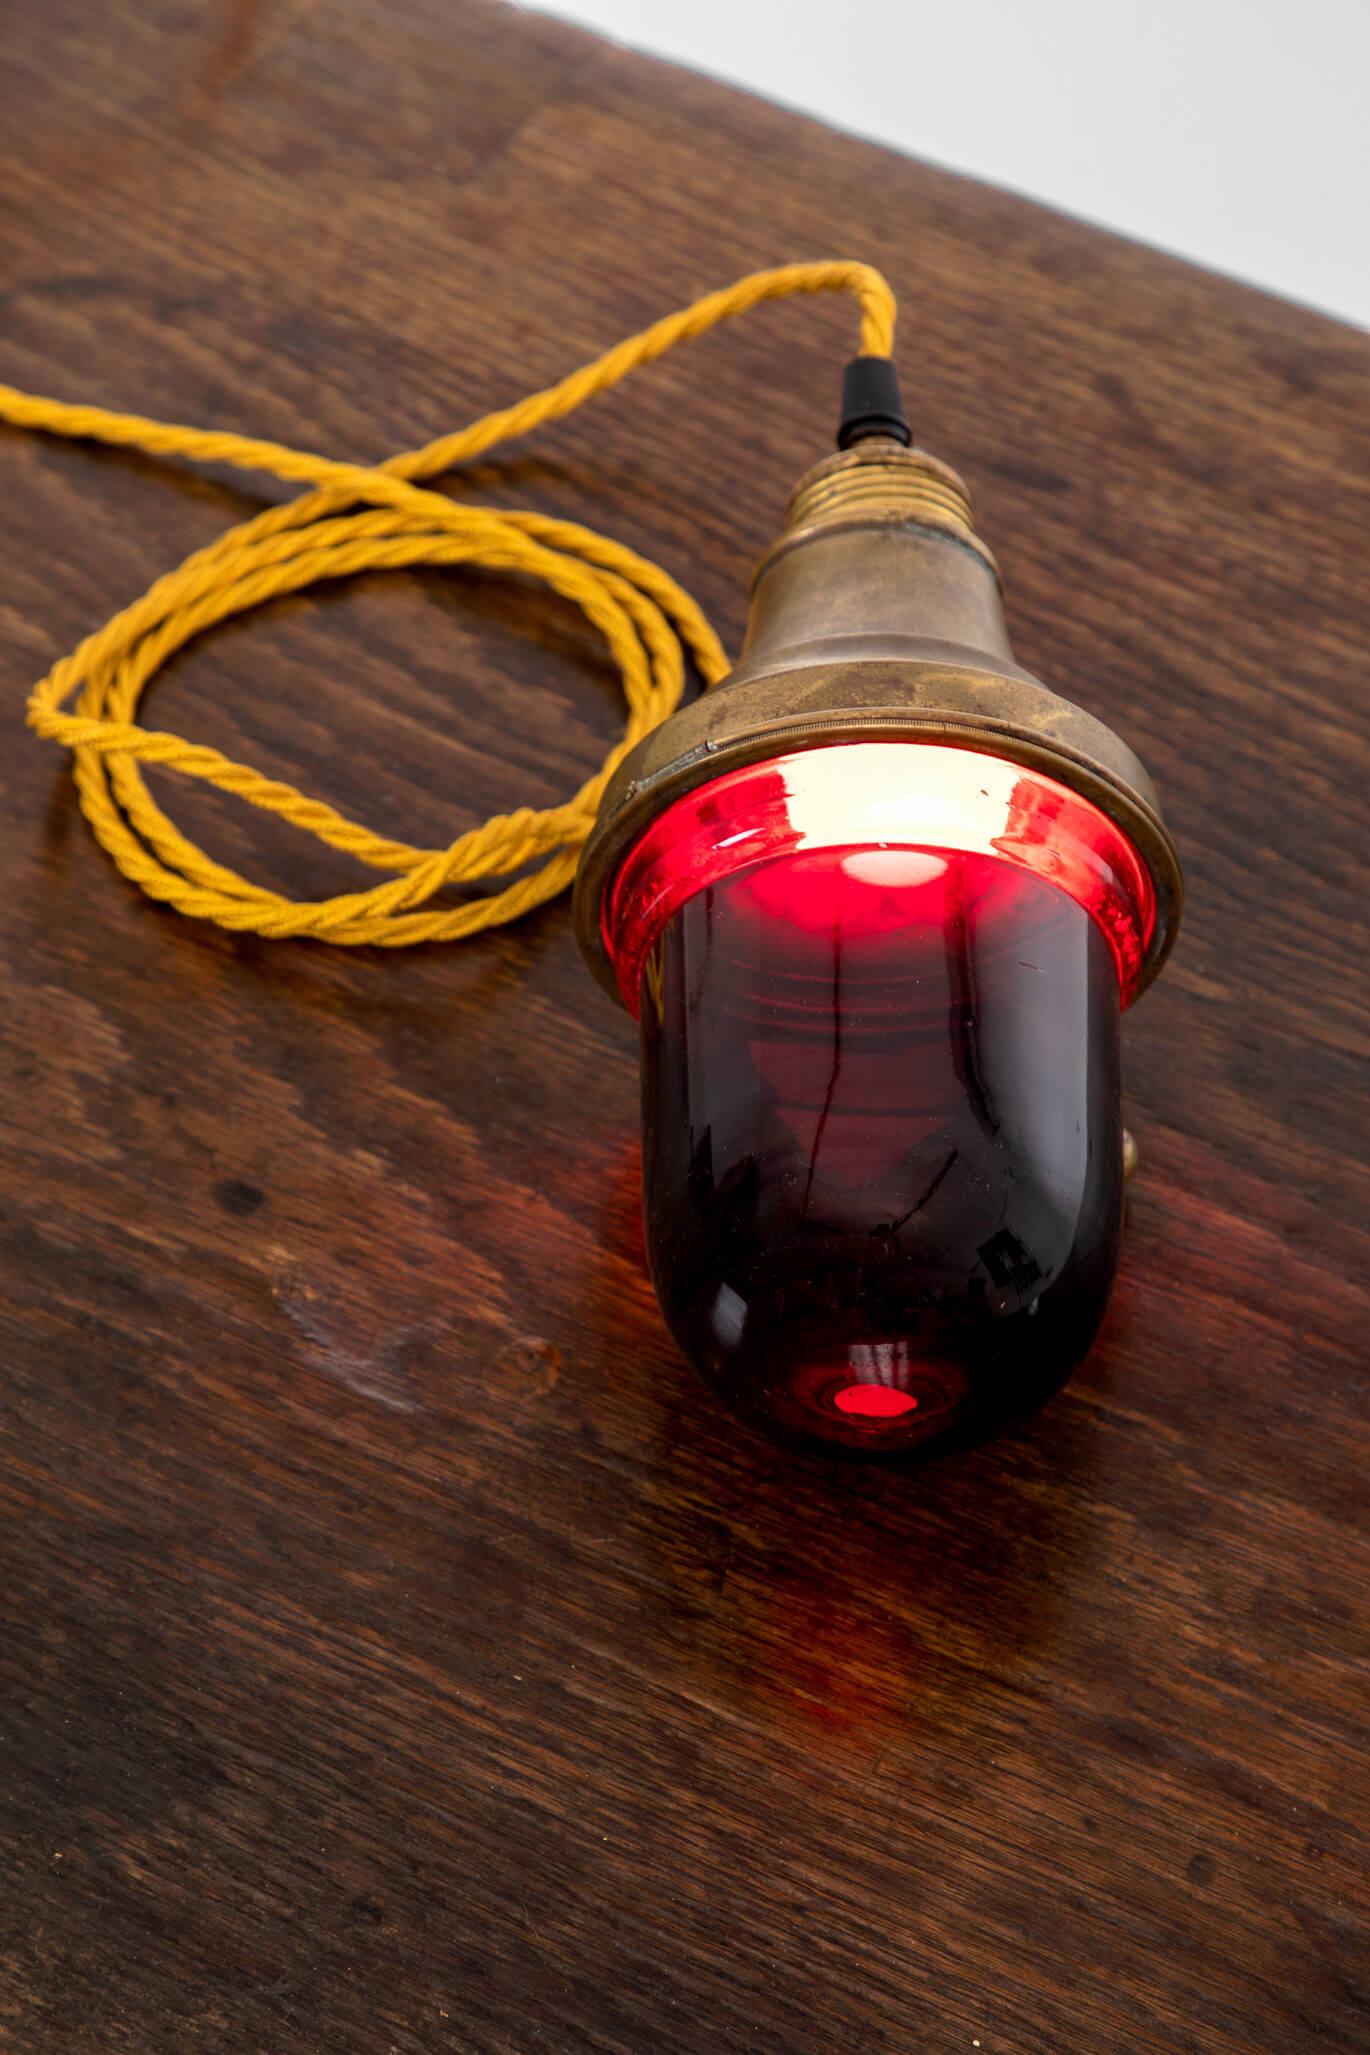 A superb darkroom lamp from a photographic studio. 
The lamp is also referred to as a ‘safelight’ as it provides illumination in the development of light-sensitive photographic images. Often dark red lighting is used in such studios as it emits low